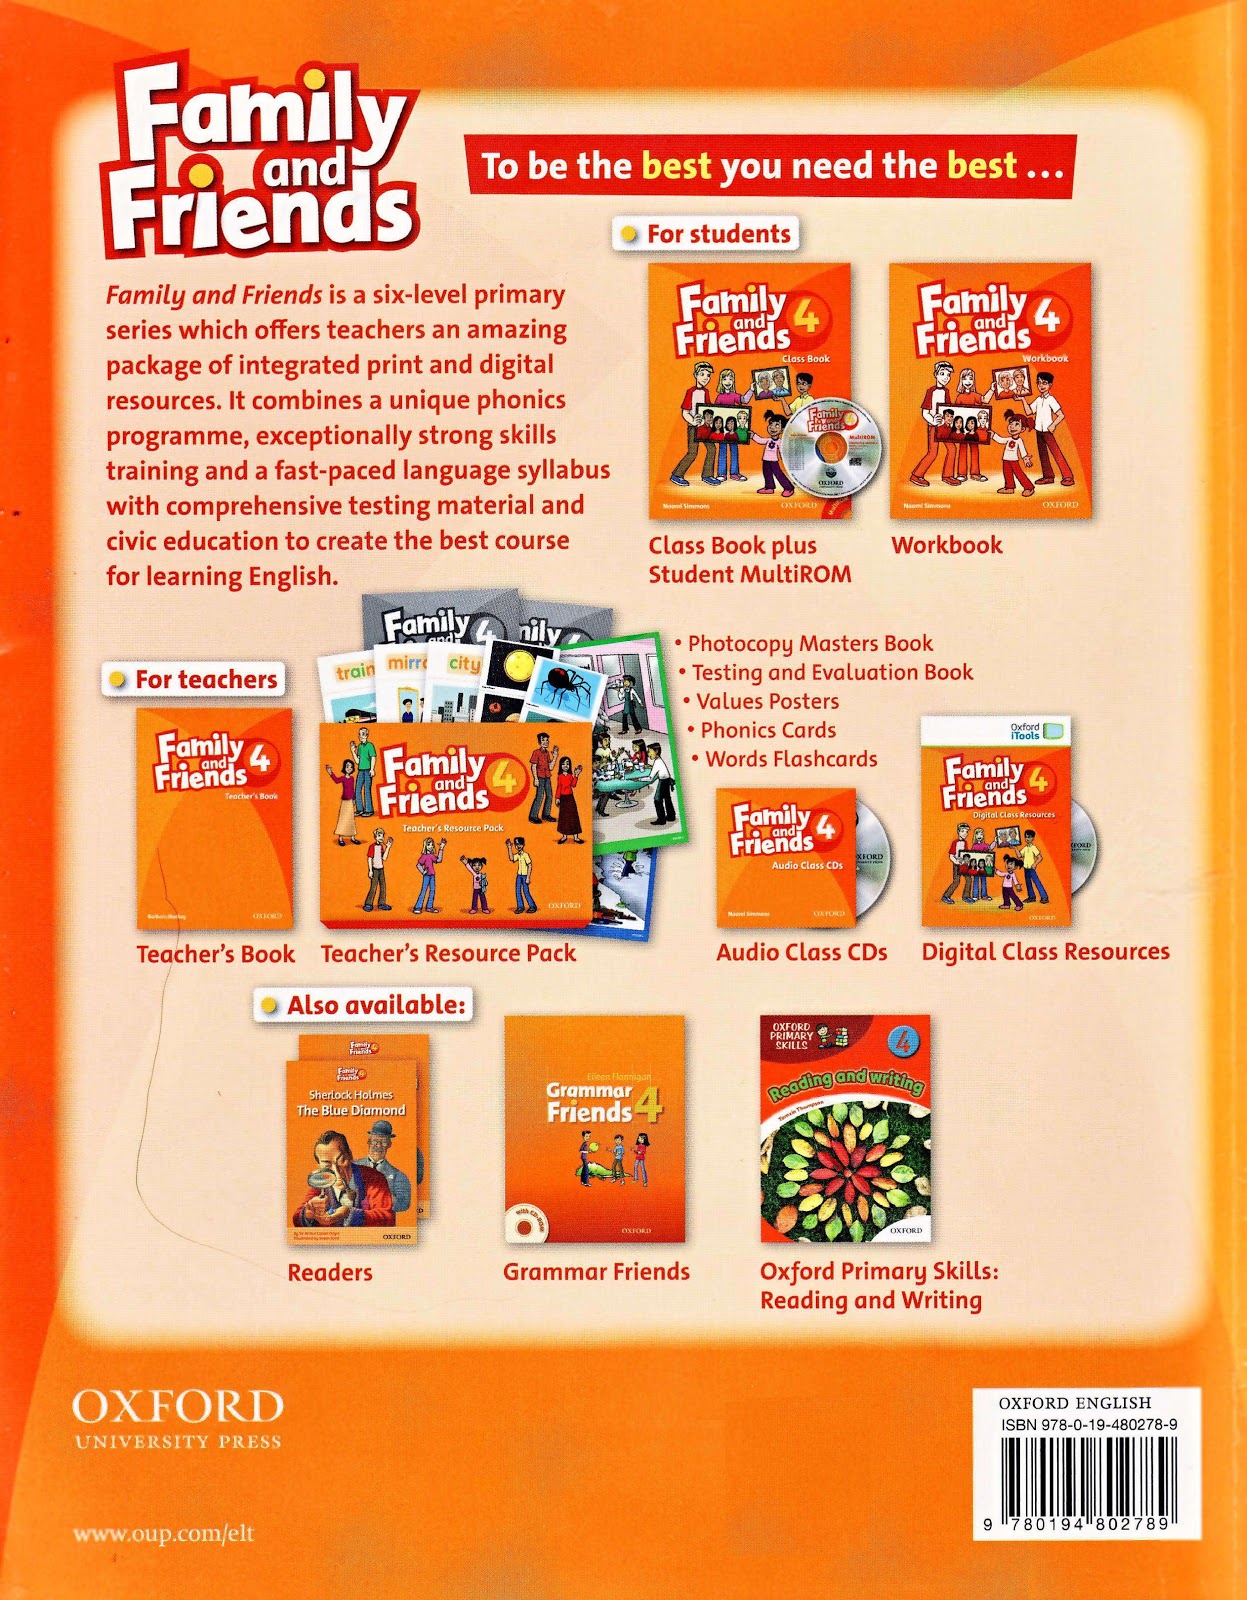 Wordwall family and friends 4. Family and friends 4 class book. Фэмили френдс 4. Оксфорд Family and friends 4. Family and friends 4 Readers.